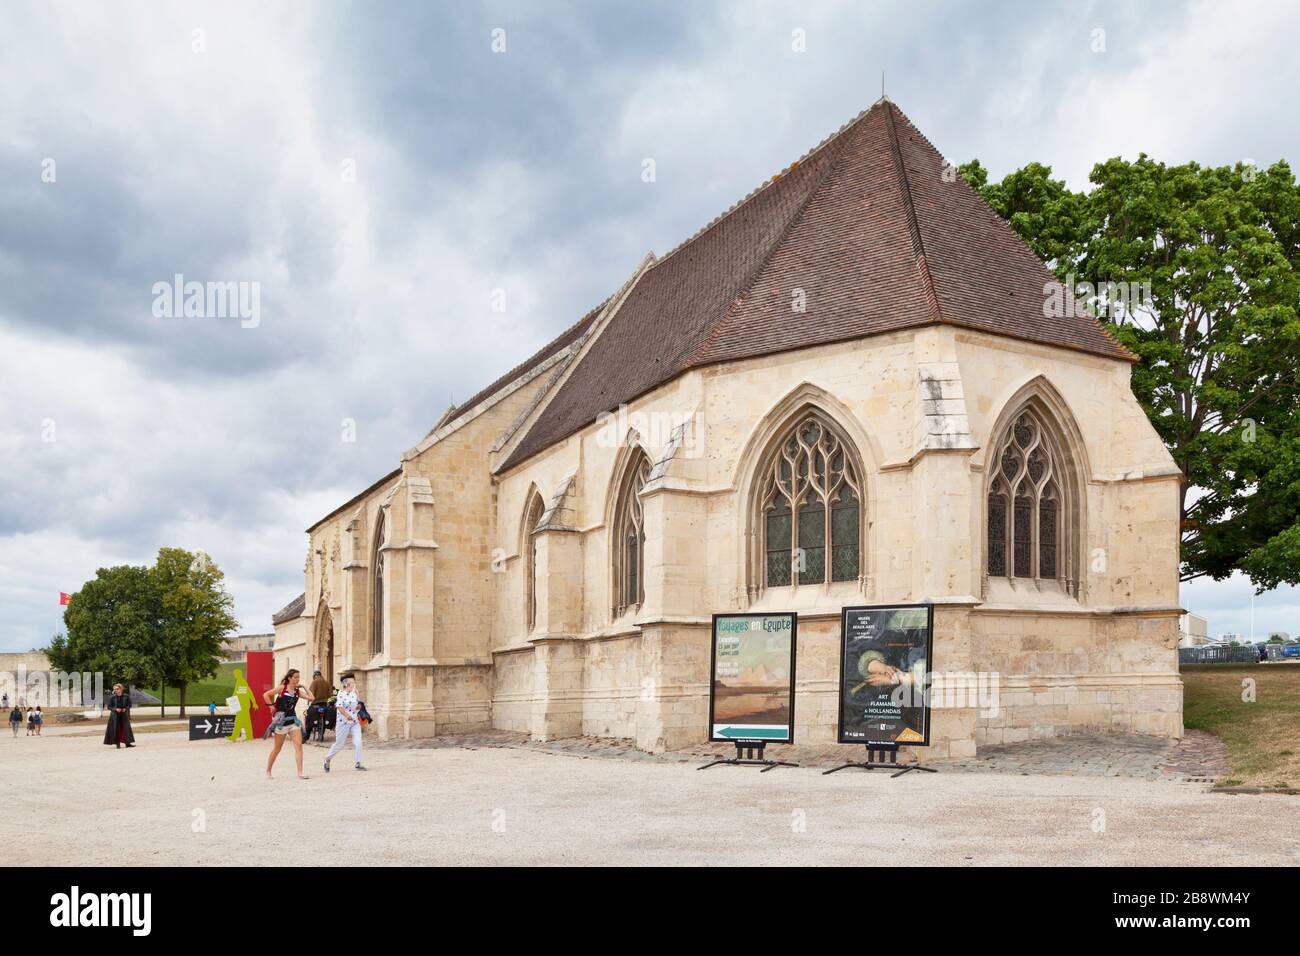 Caen, France - July 21 2017: The Church of Saint George is dedicated to Georges de Lydda. It was was built in the second half of the eleventh century. Stock Photo